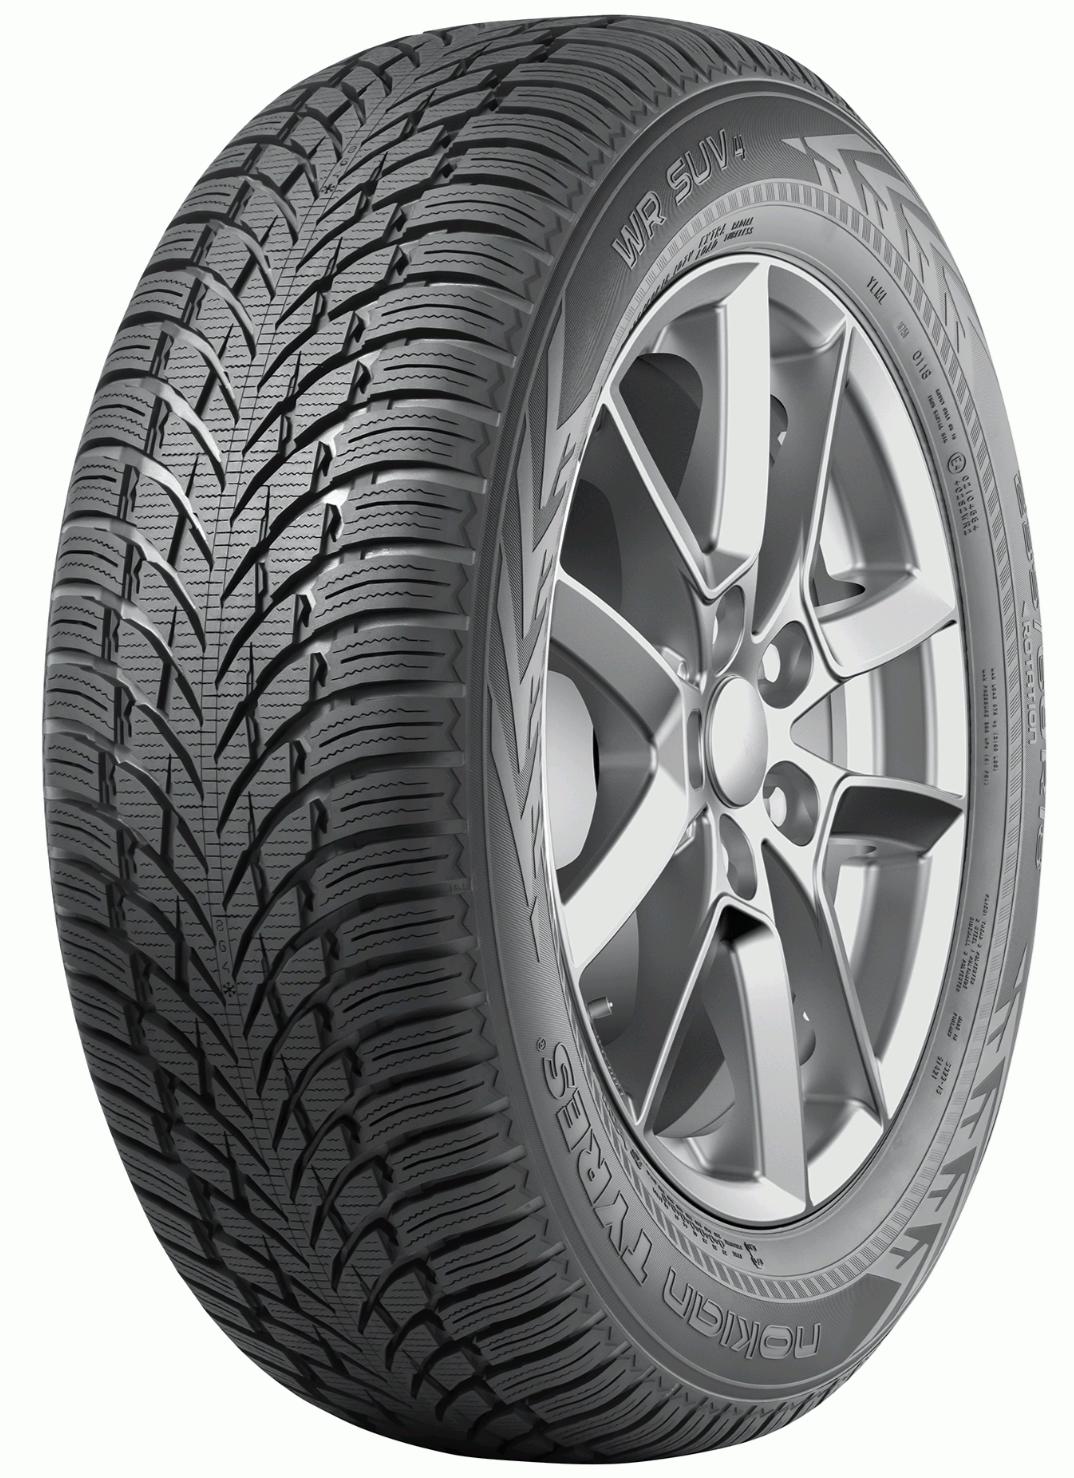 Nokian WR Tests 4 Tire SUV and Reviews 